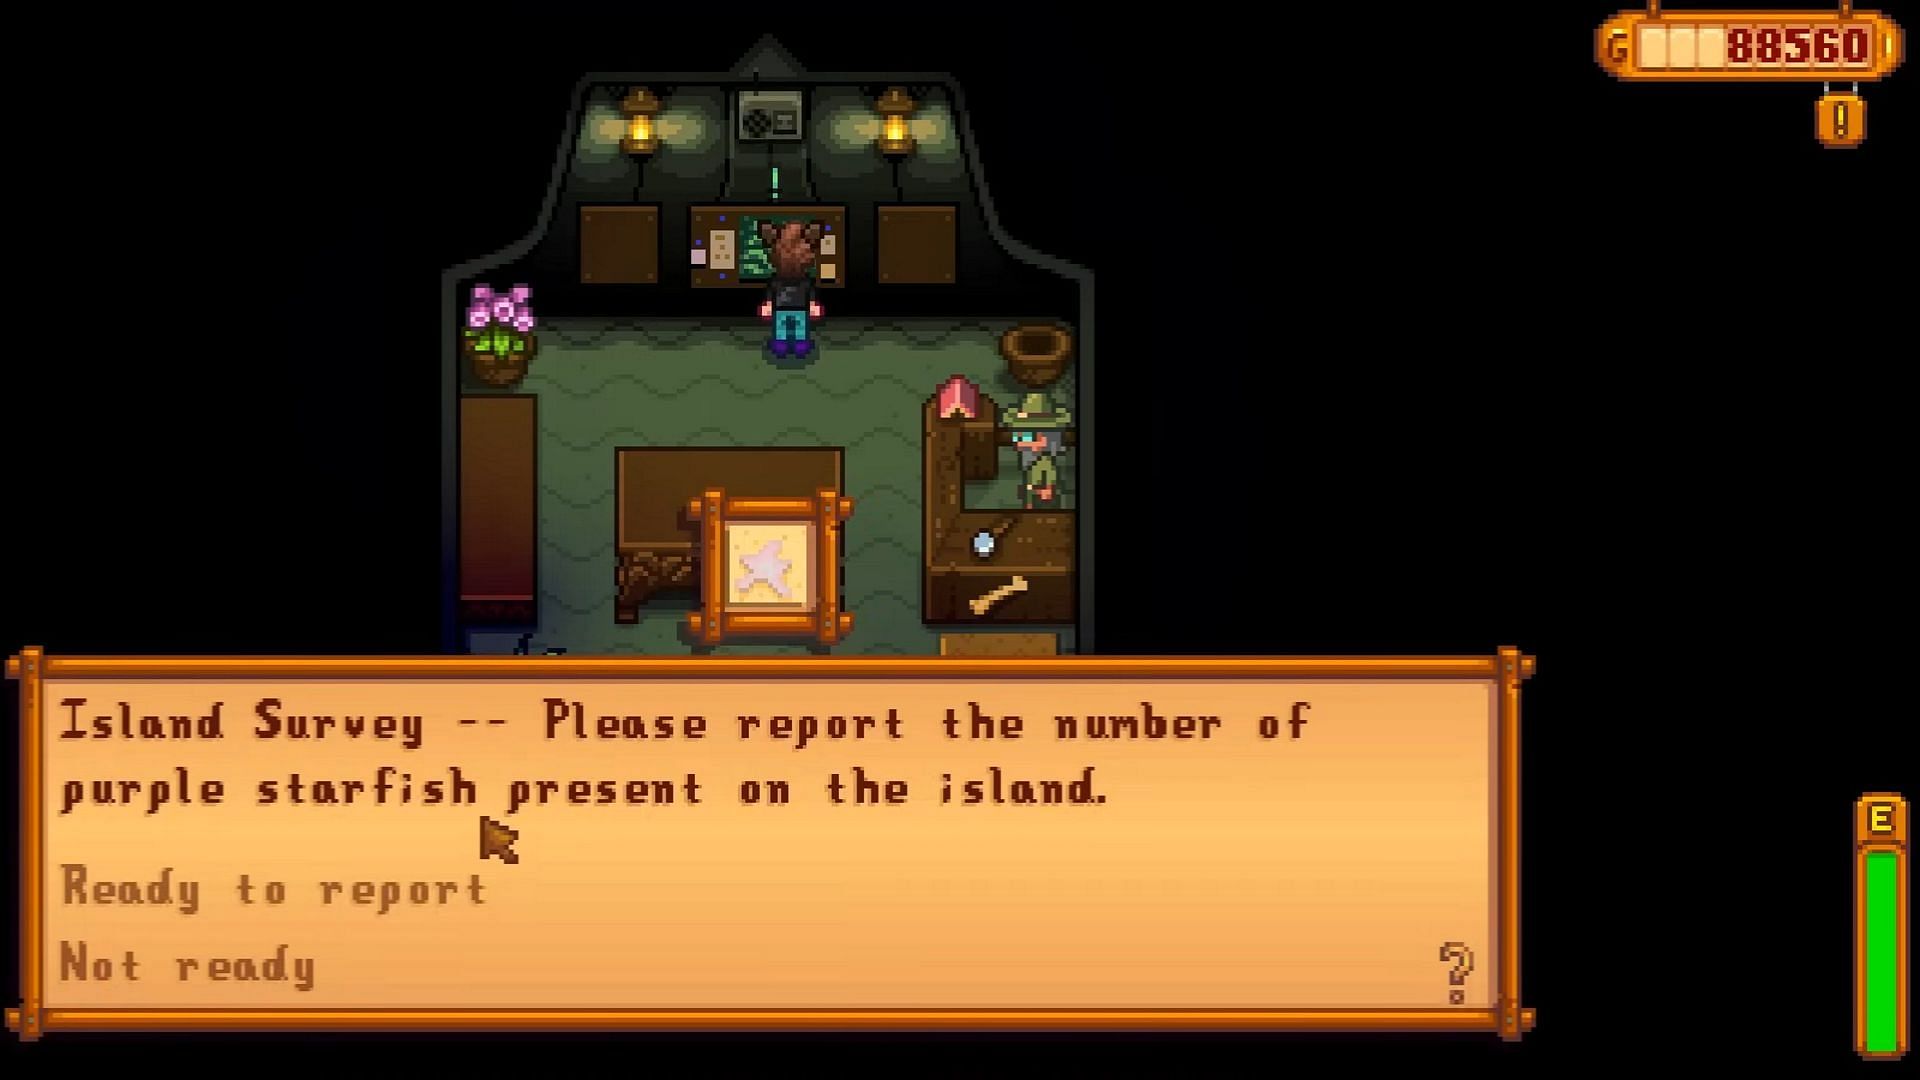 The Field Office has many golden walnut locations in Stardew Valley (Image via ConcernedApe)